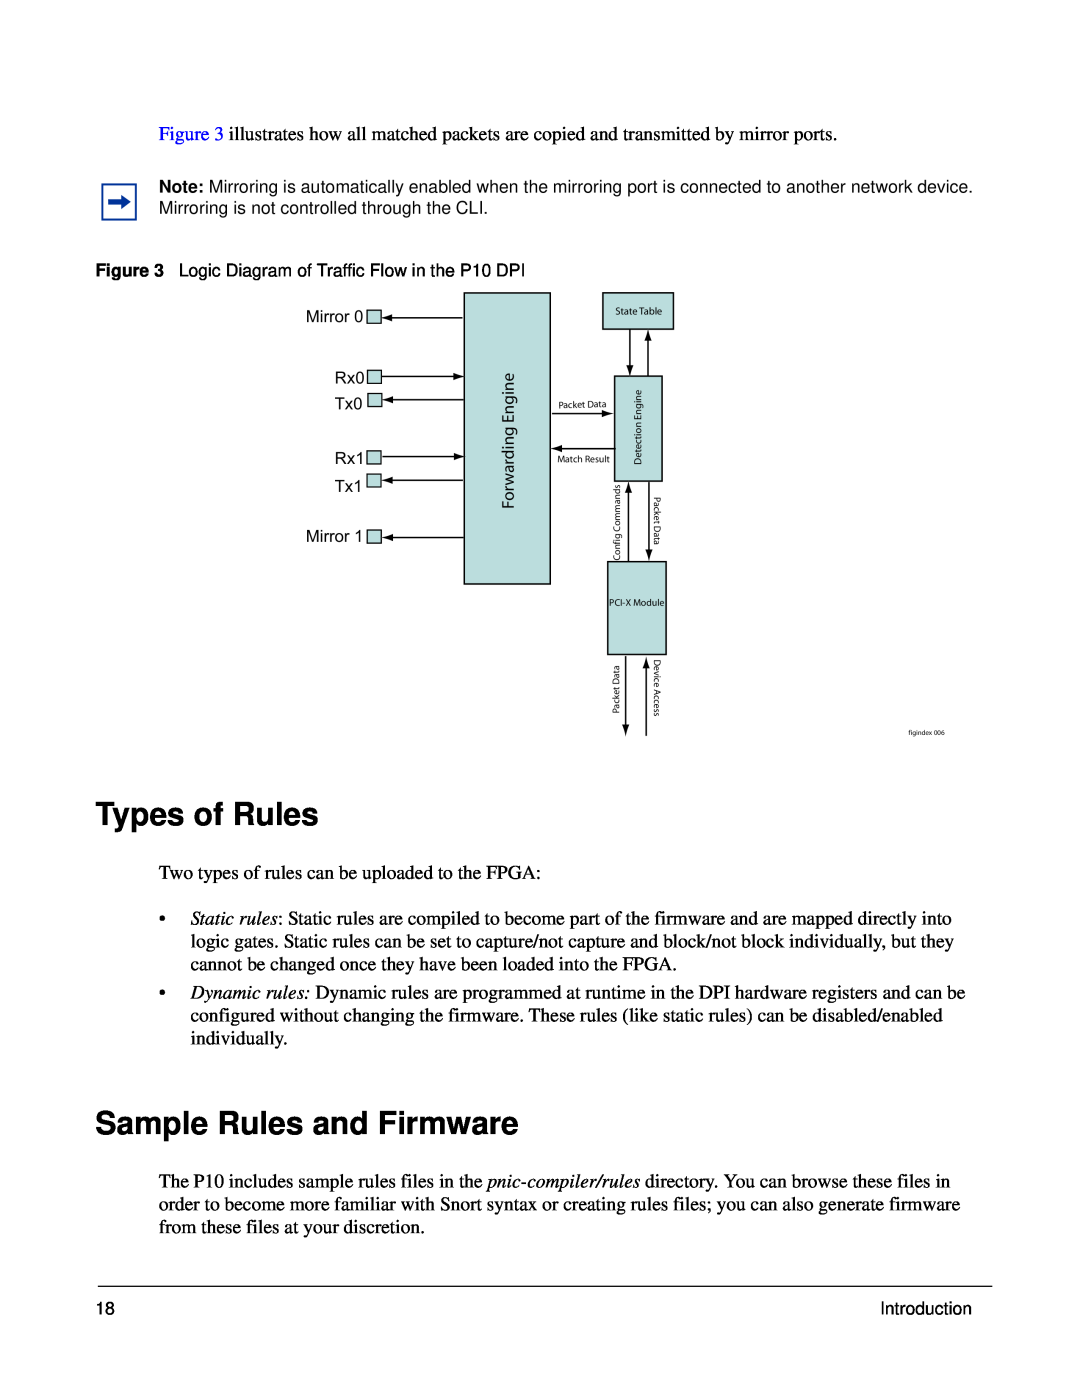 Force10 Networks 100-00055-01 manual Types of Rules, Sample Rules and Firmware 